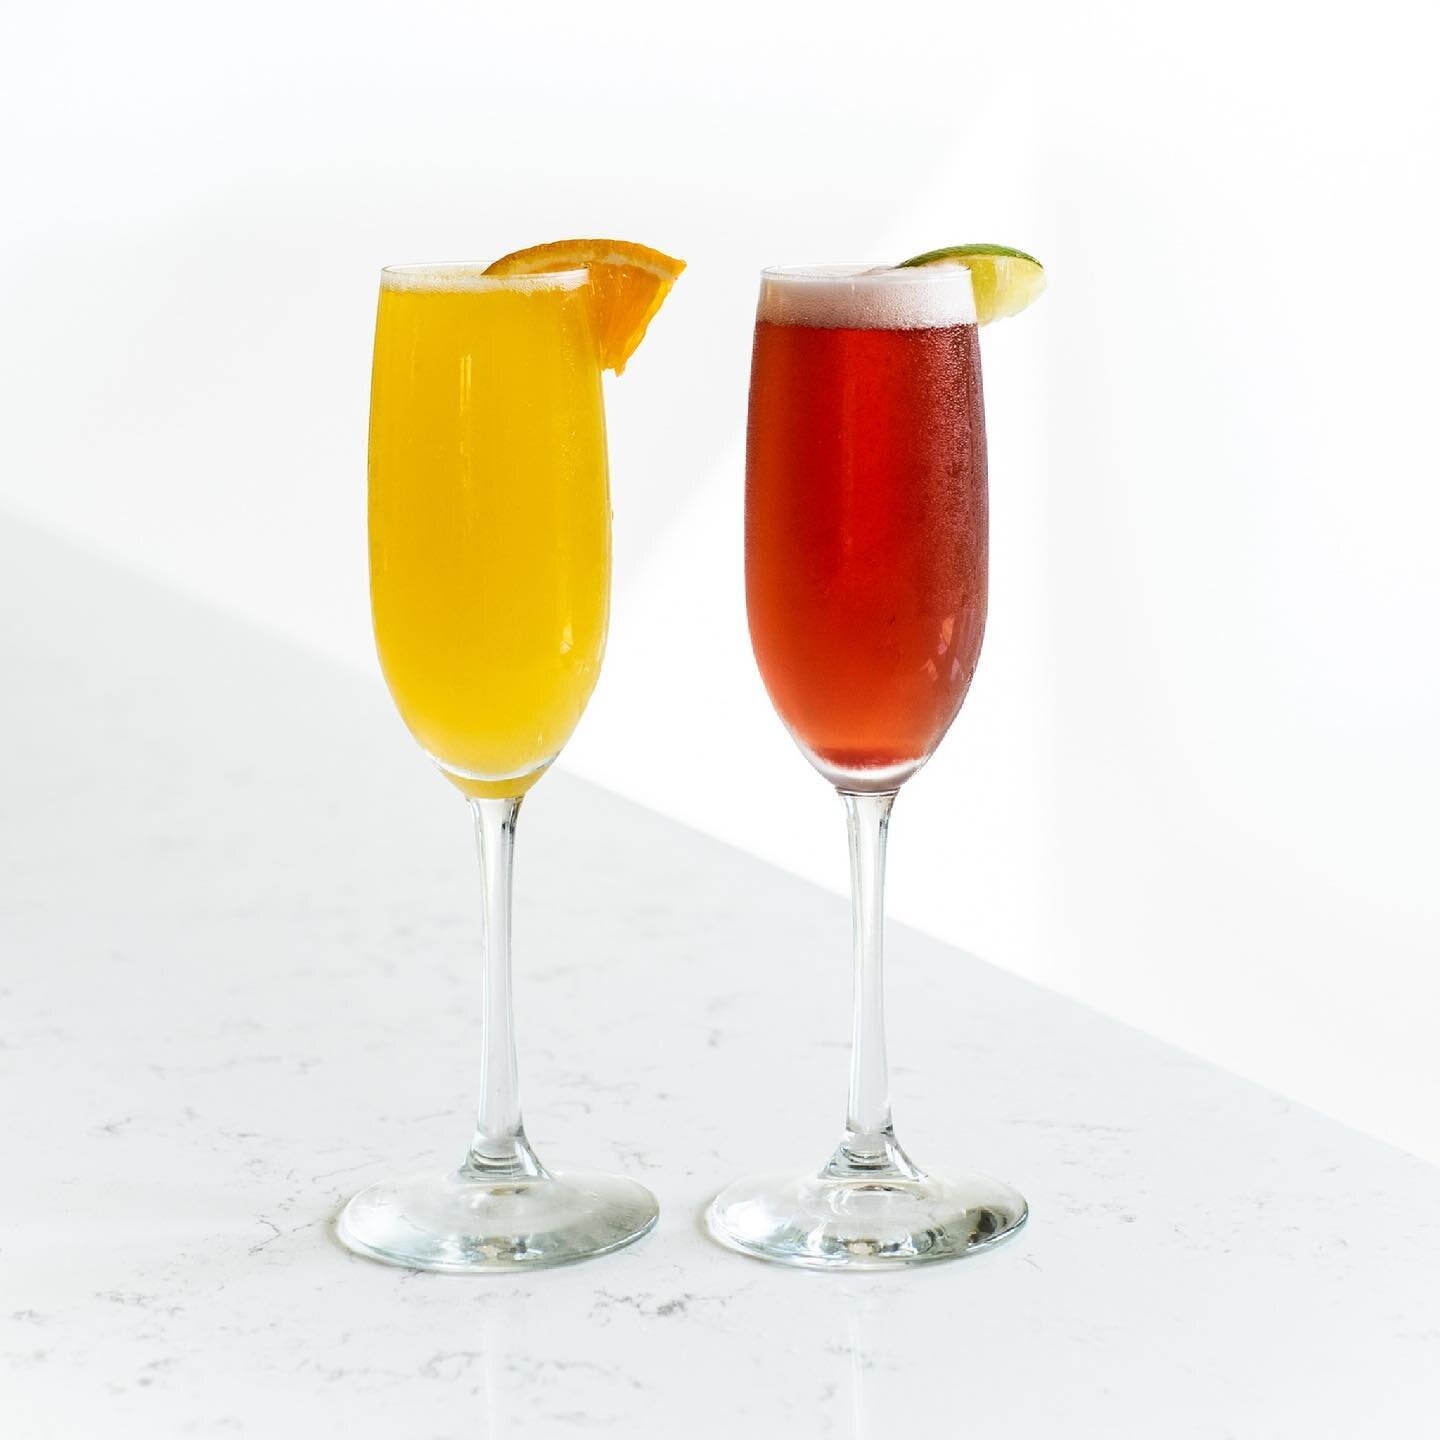 It&rsquo;s hot out there this week&hellip;how about some fresh, cold mimosas to keep you cool? 😉☀️🥂